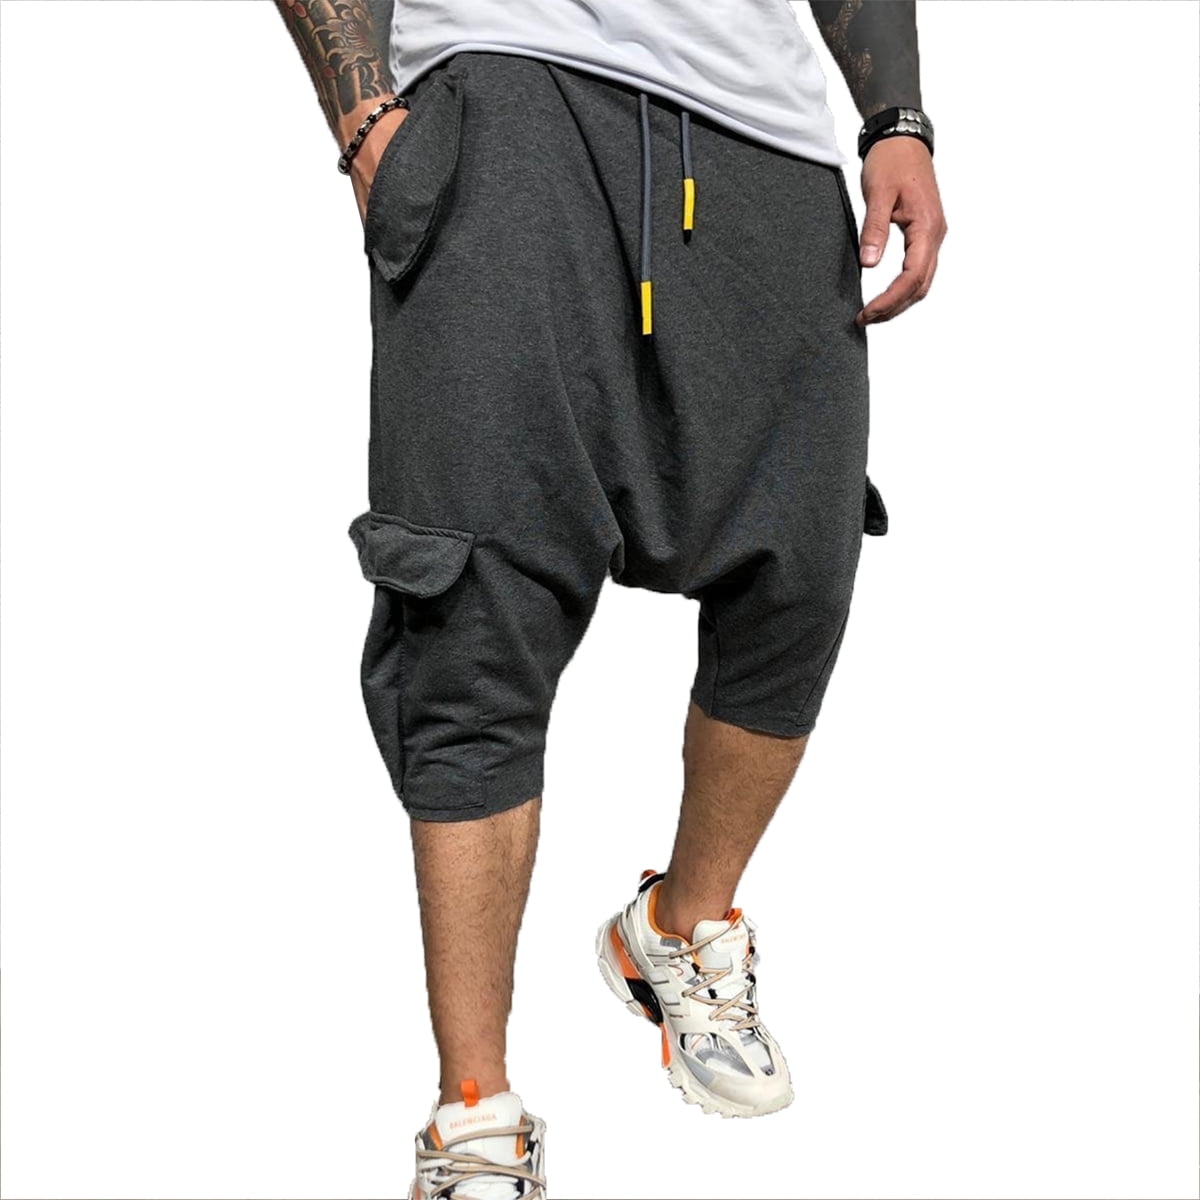 Domple Mens Baggy Loose Casual Harem Trousers Cozy Solid Color Jogger Pants